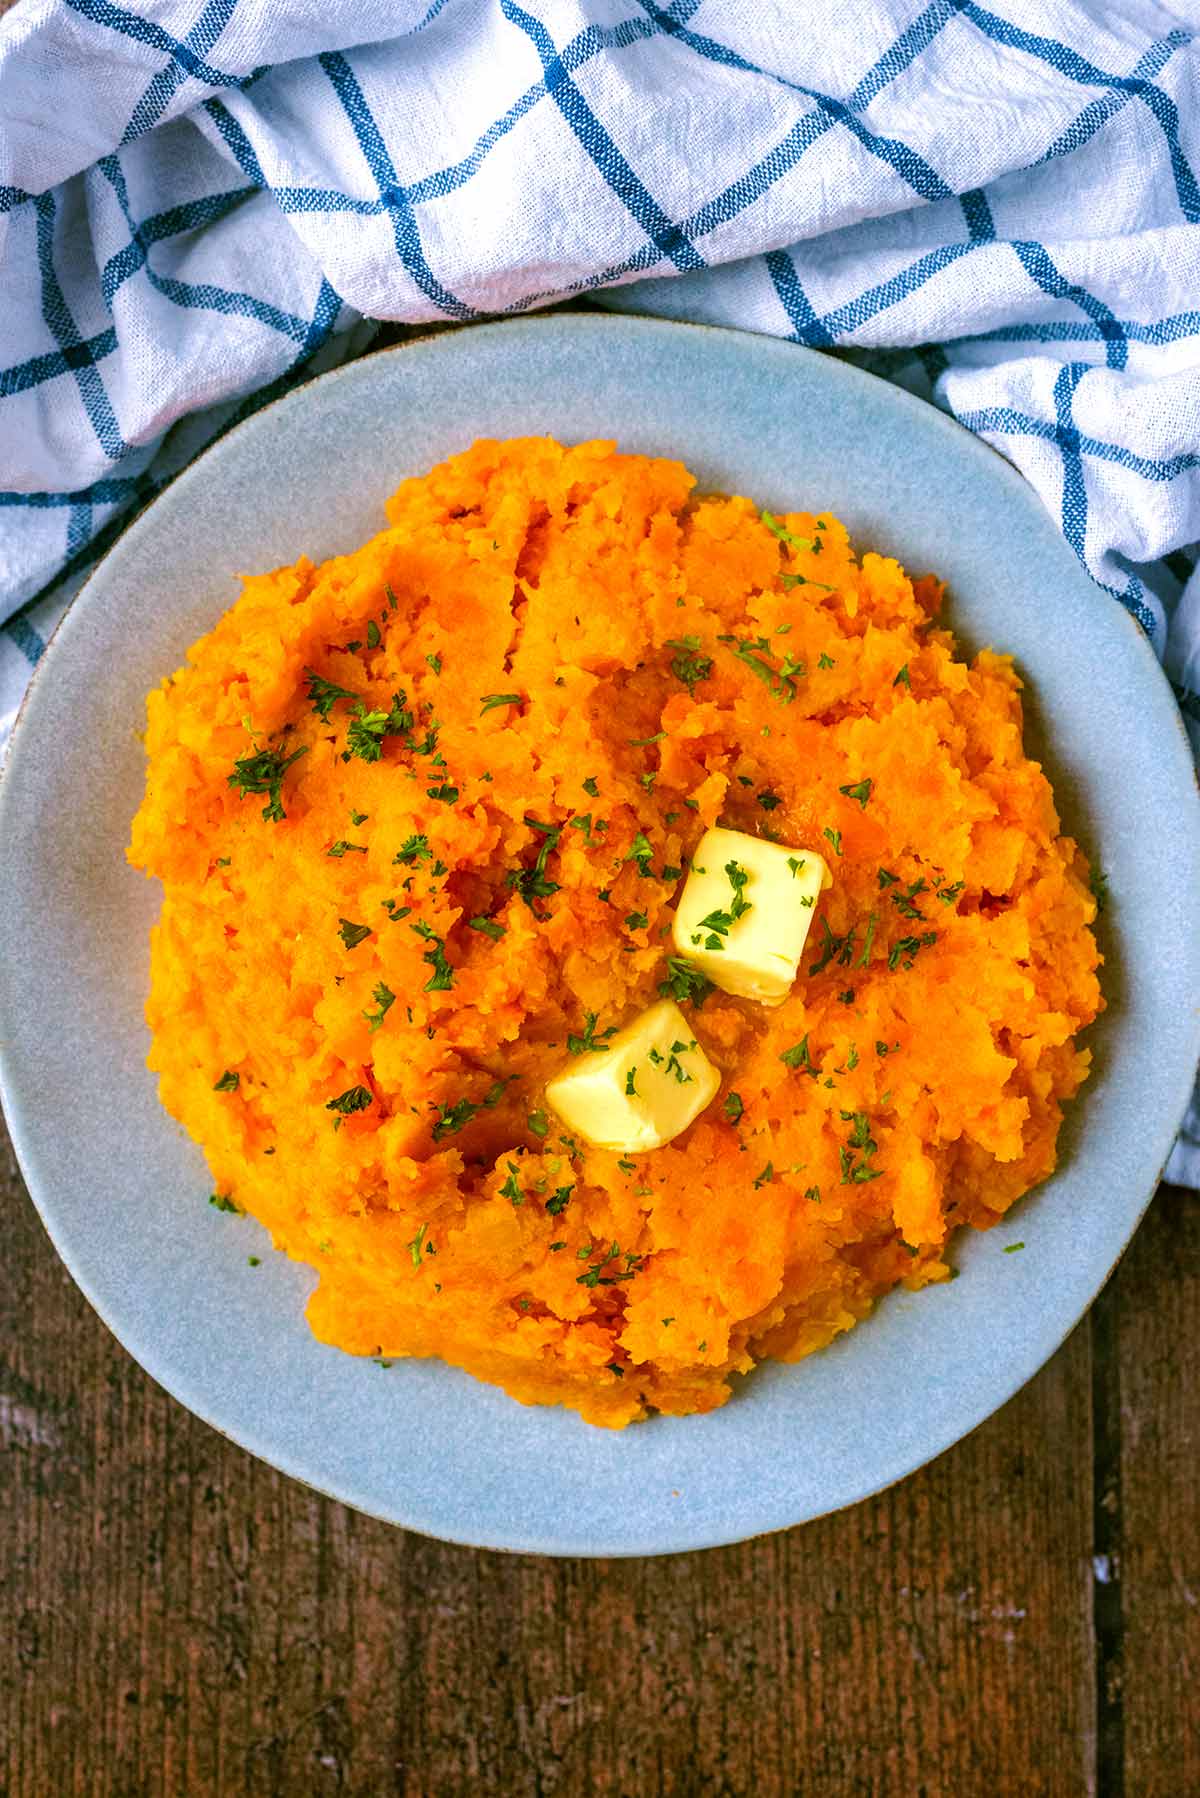 A plate of orange coloured mash topped with butter and chopped herbs.